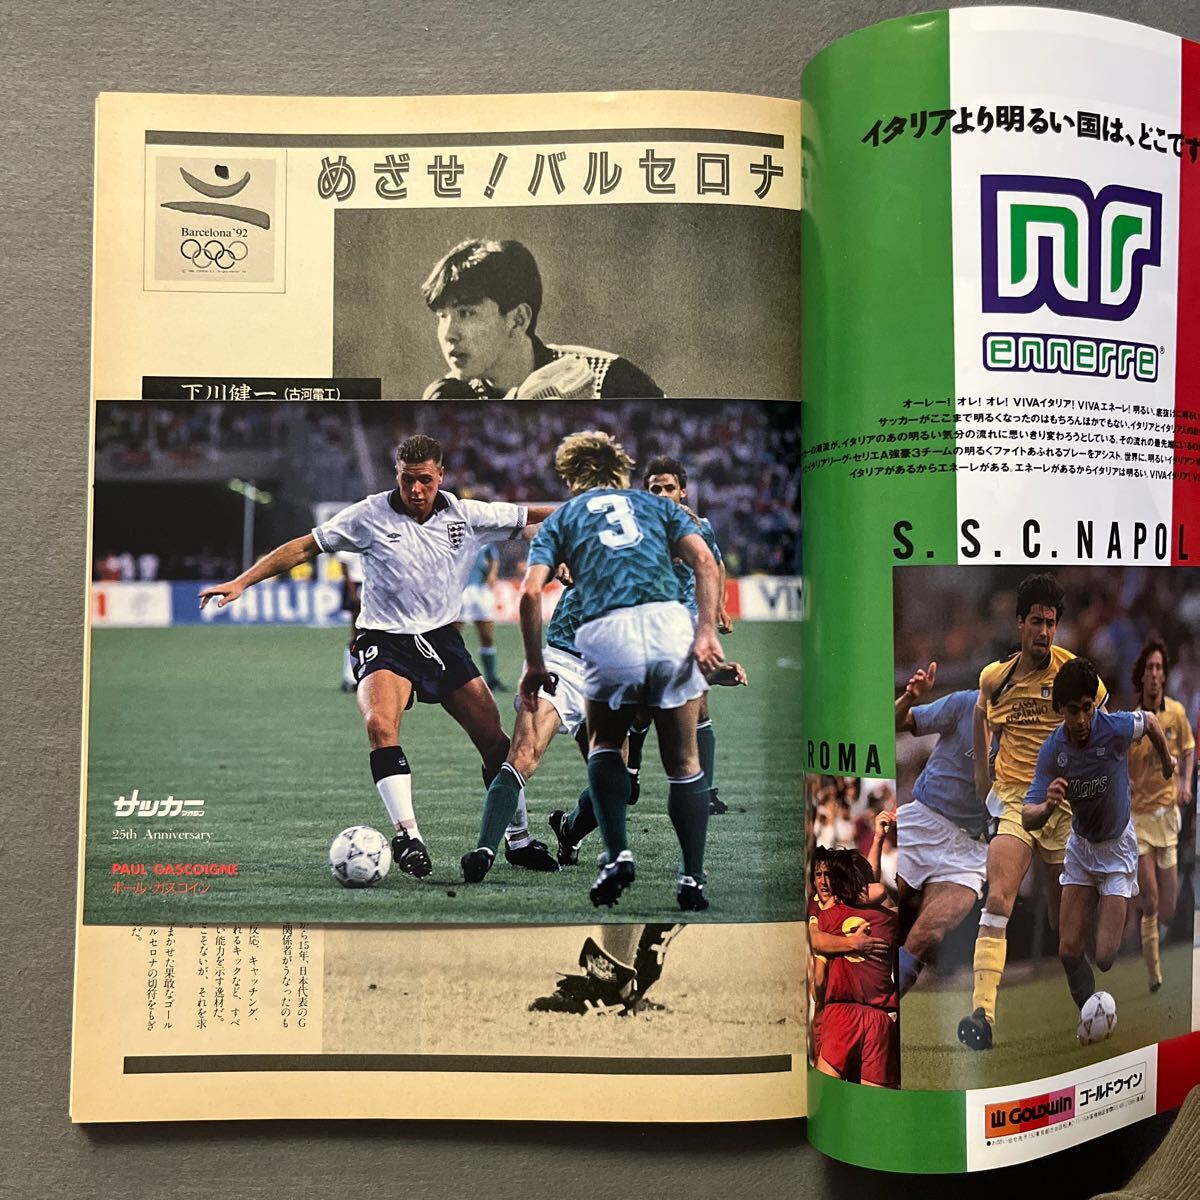  soccer magazine 11 month number * Heisei era 2 year 11 month 1 day issue *No.379* Italy super cup *na poly- *yu vent s* height jpy . cup * tuck seal * gas coin 